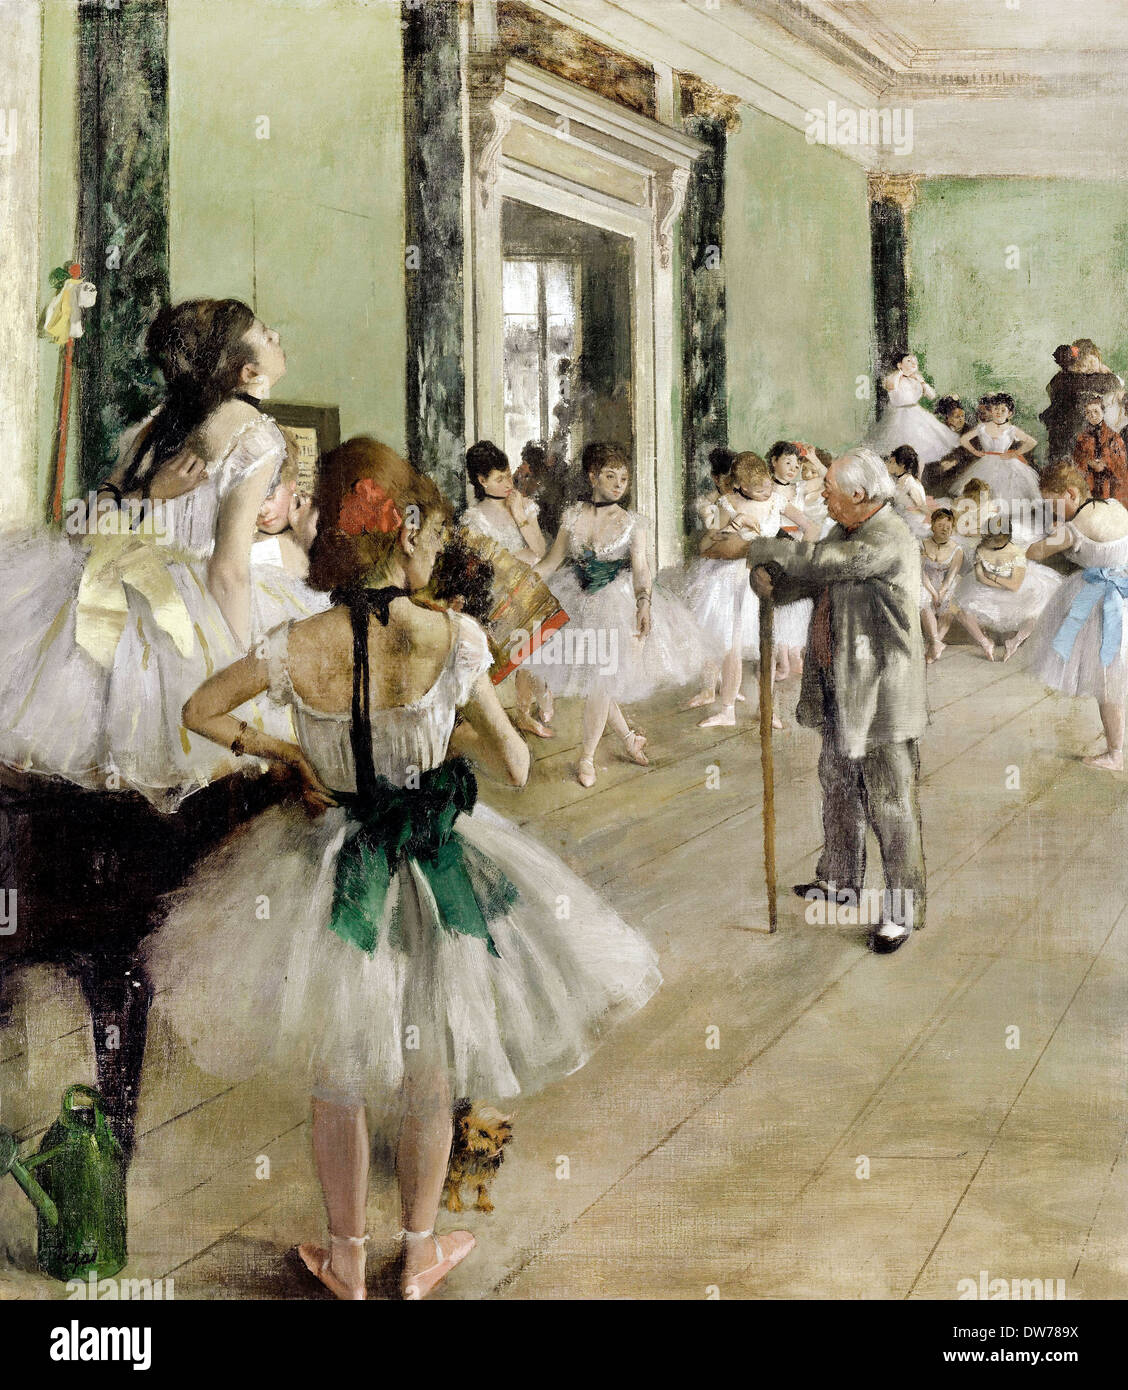 Edgar Degas, The Ballet Class 1871-1874 Oil on canvas. Musee d'Orsay, Paris, France. Stock Photo